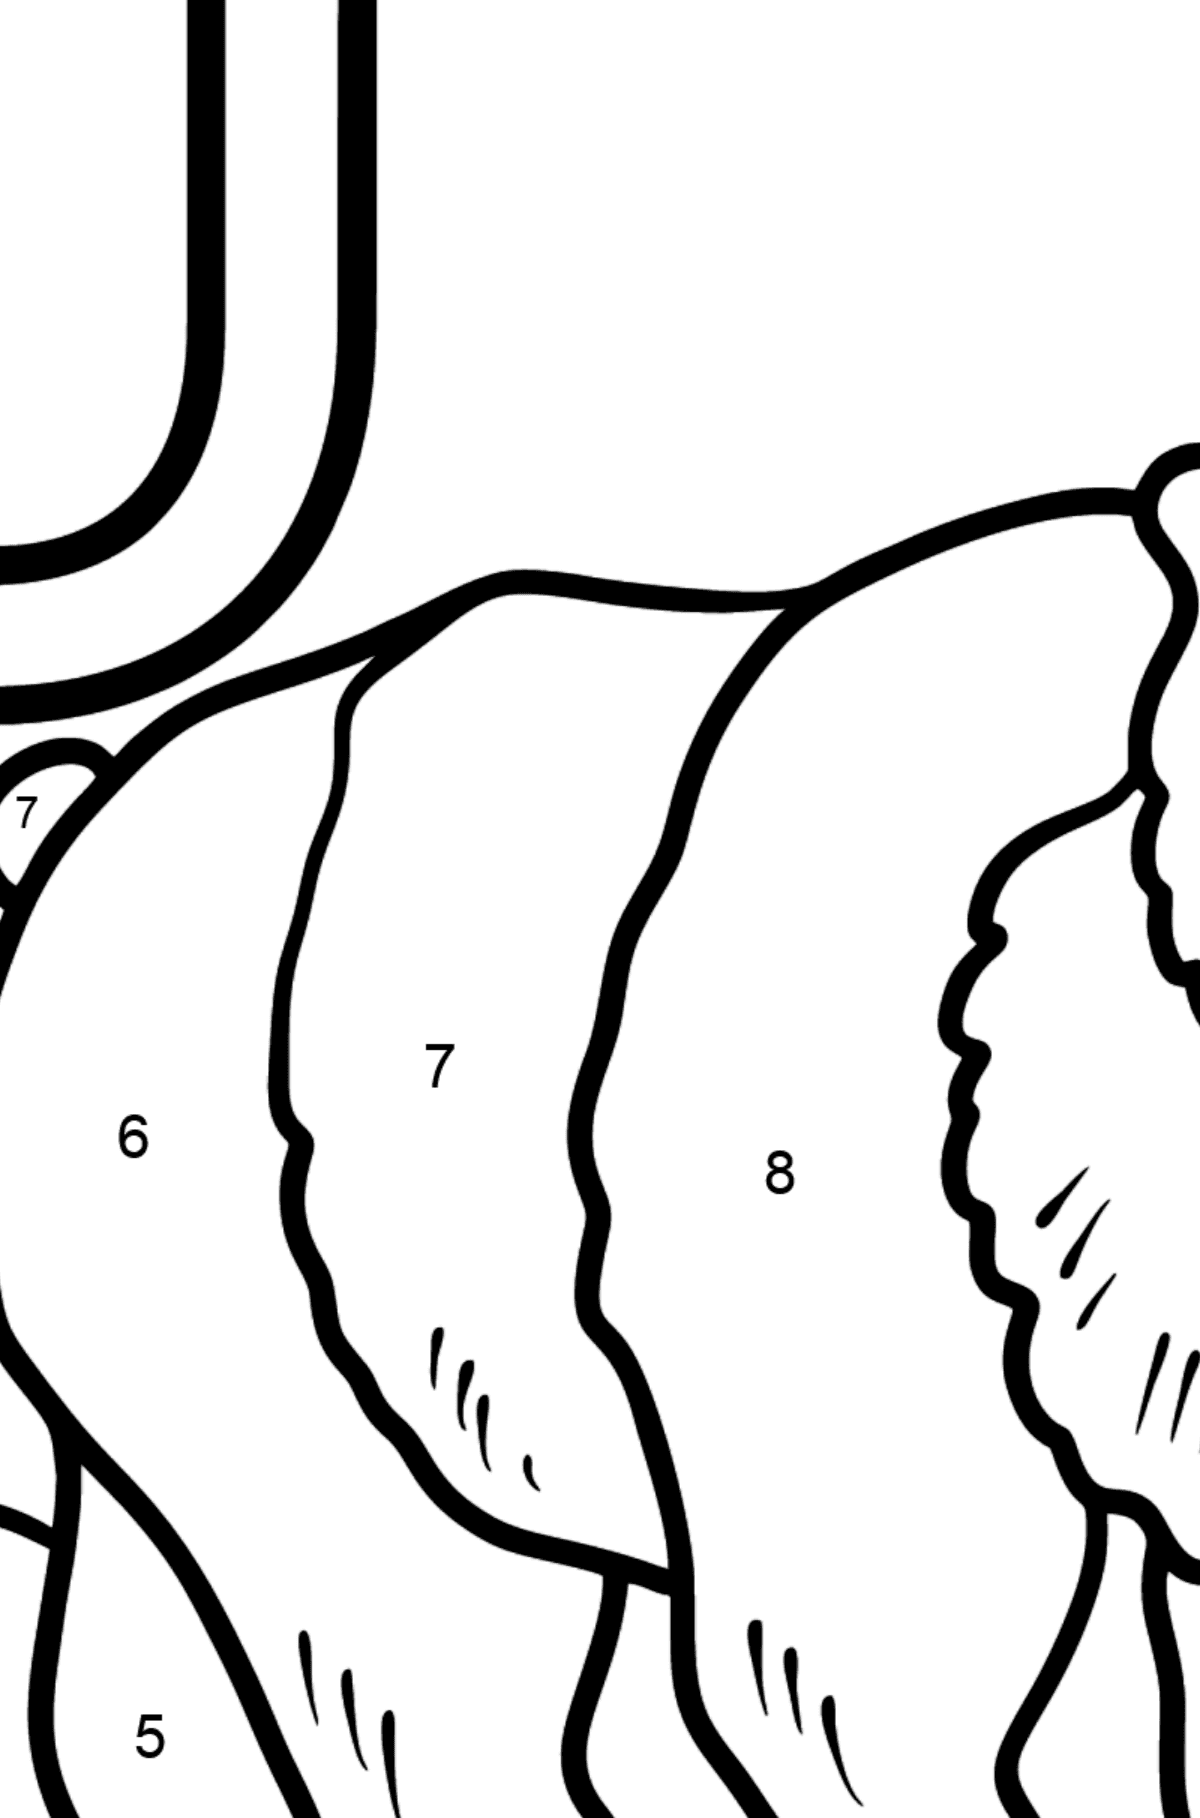 Portuguese Letter U coloring pages - URSO - Coloring by Numbers for Kids